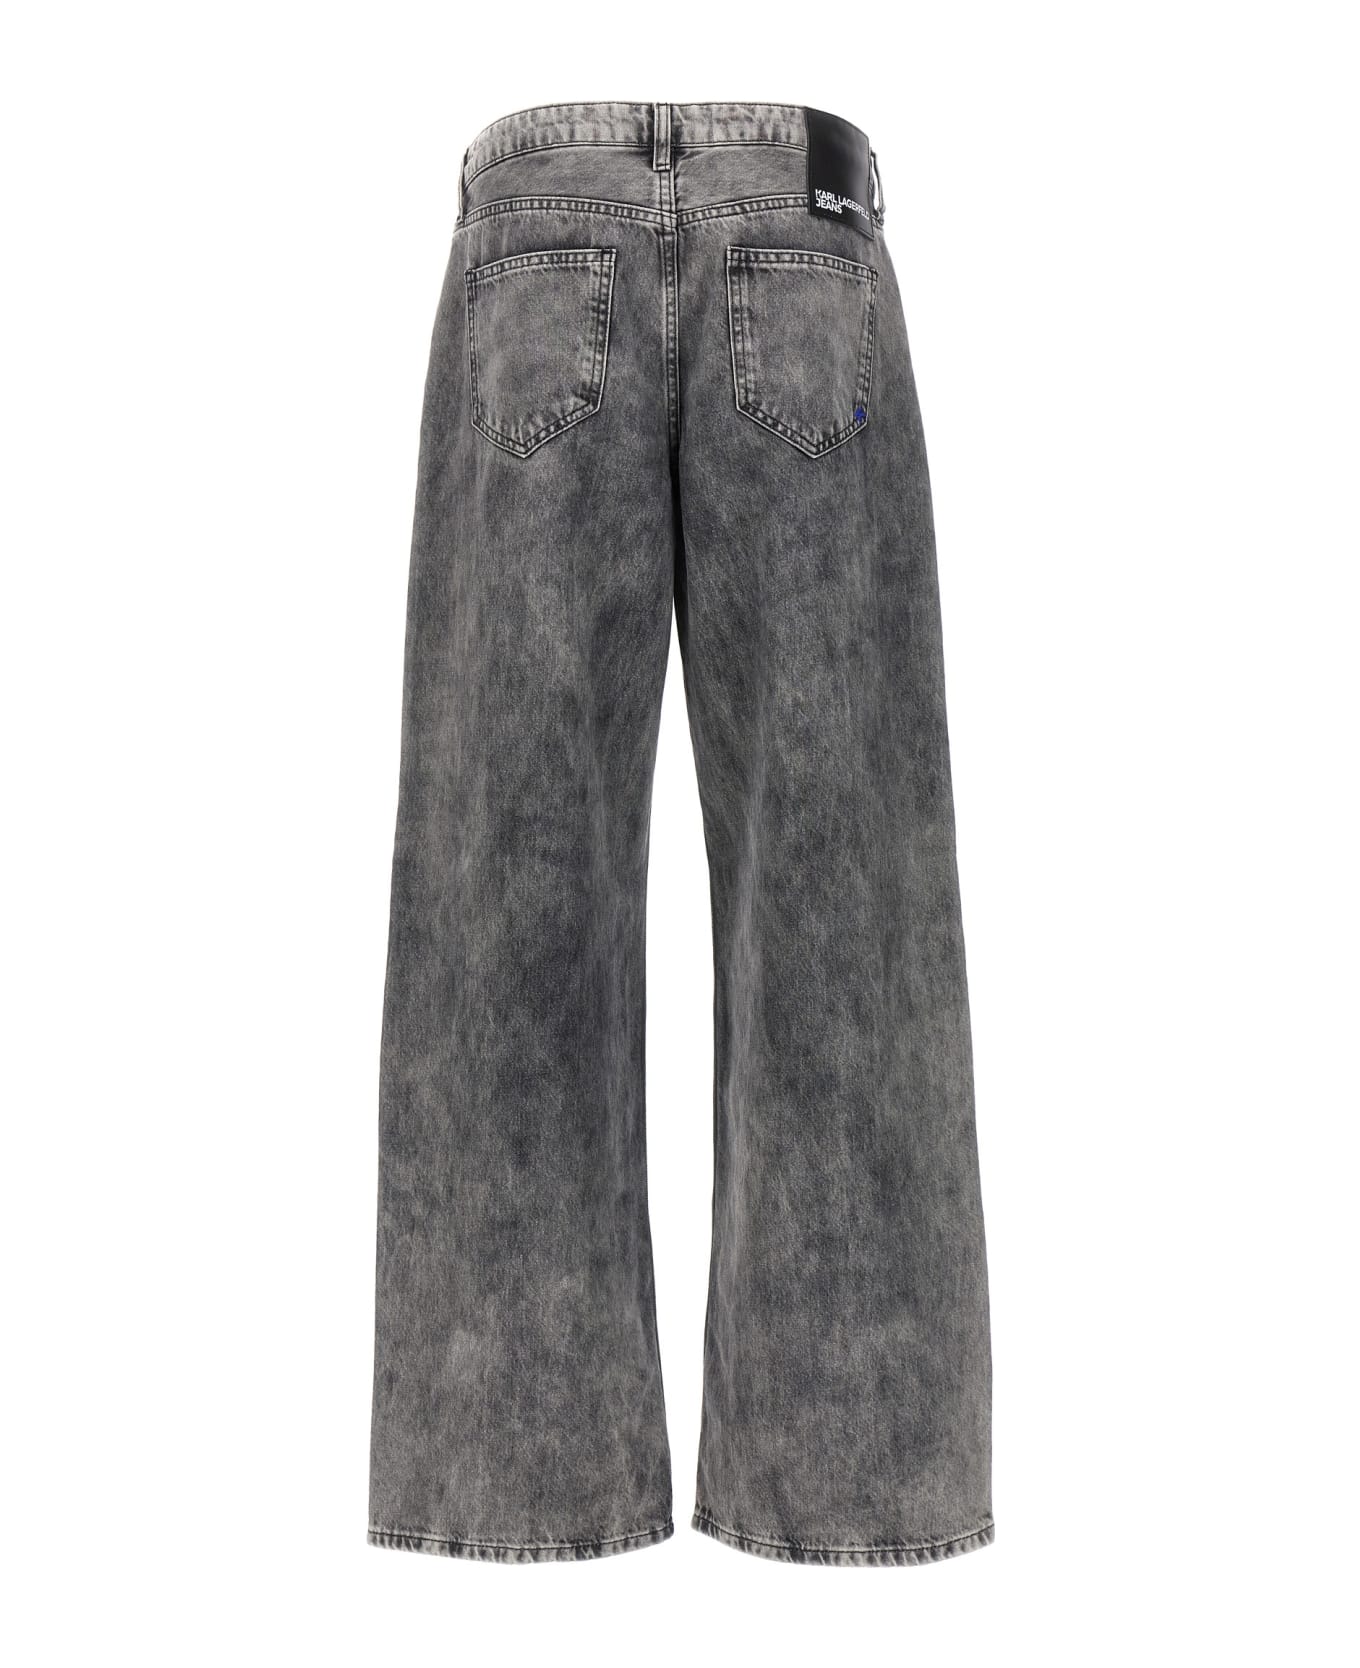 Karl Lagerfeld 'relaxed' Jeans - Gray